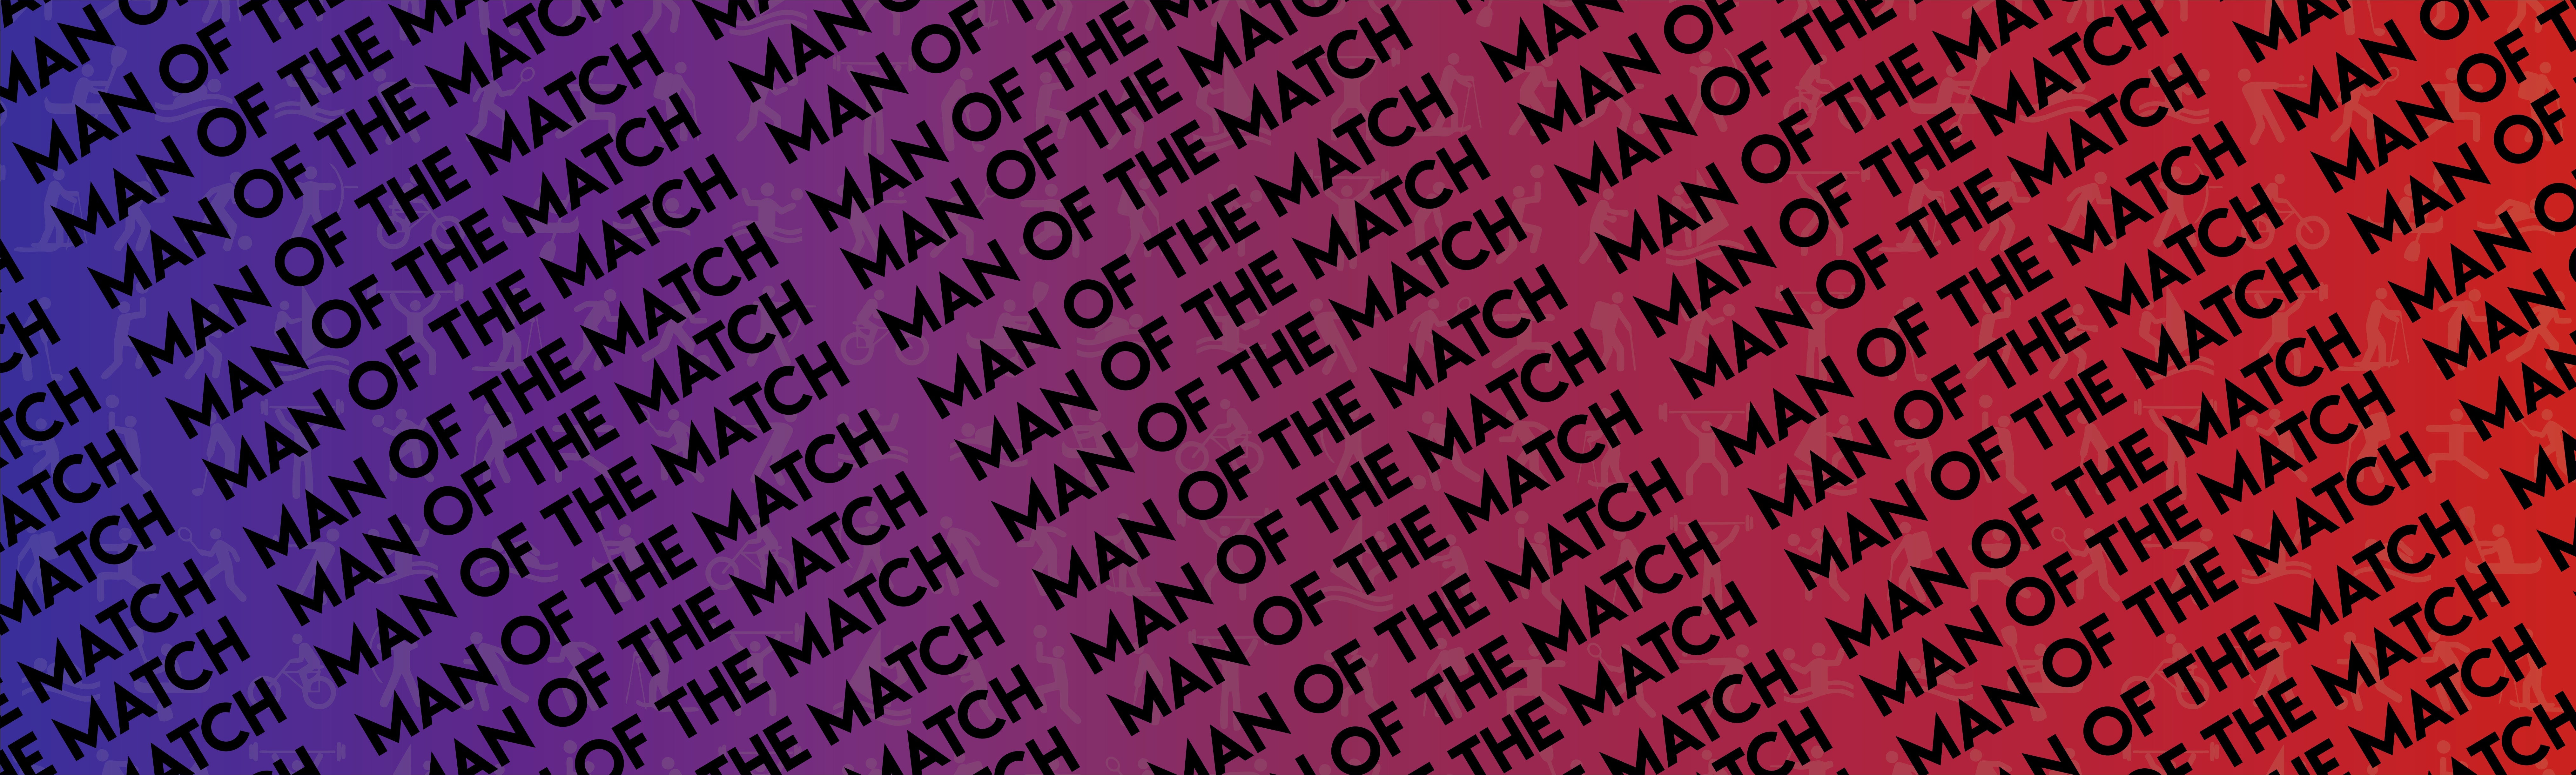 Man/Player of the Match